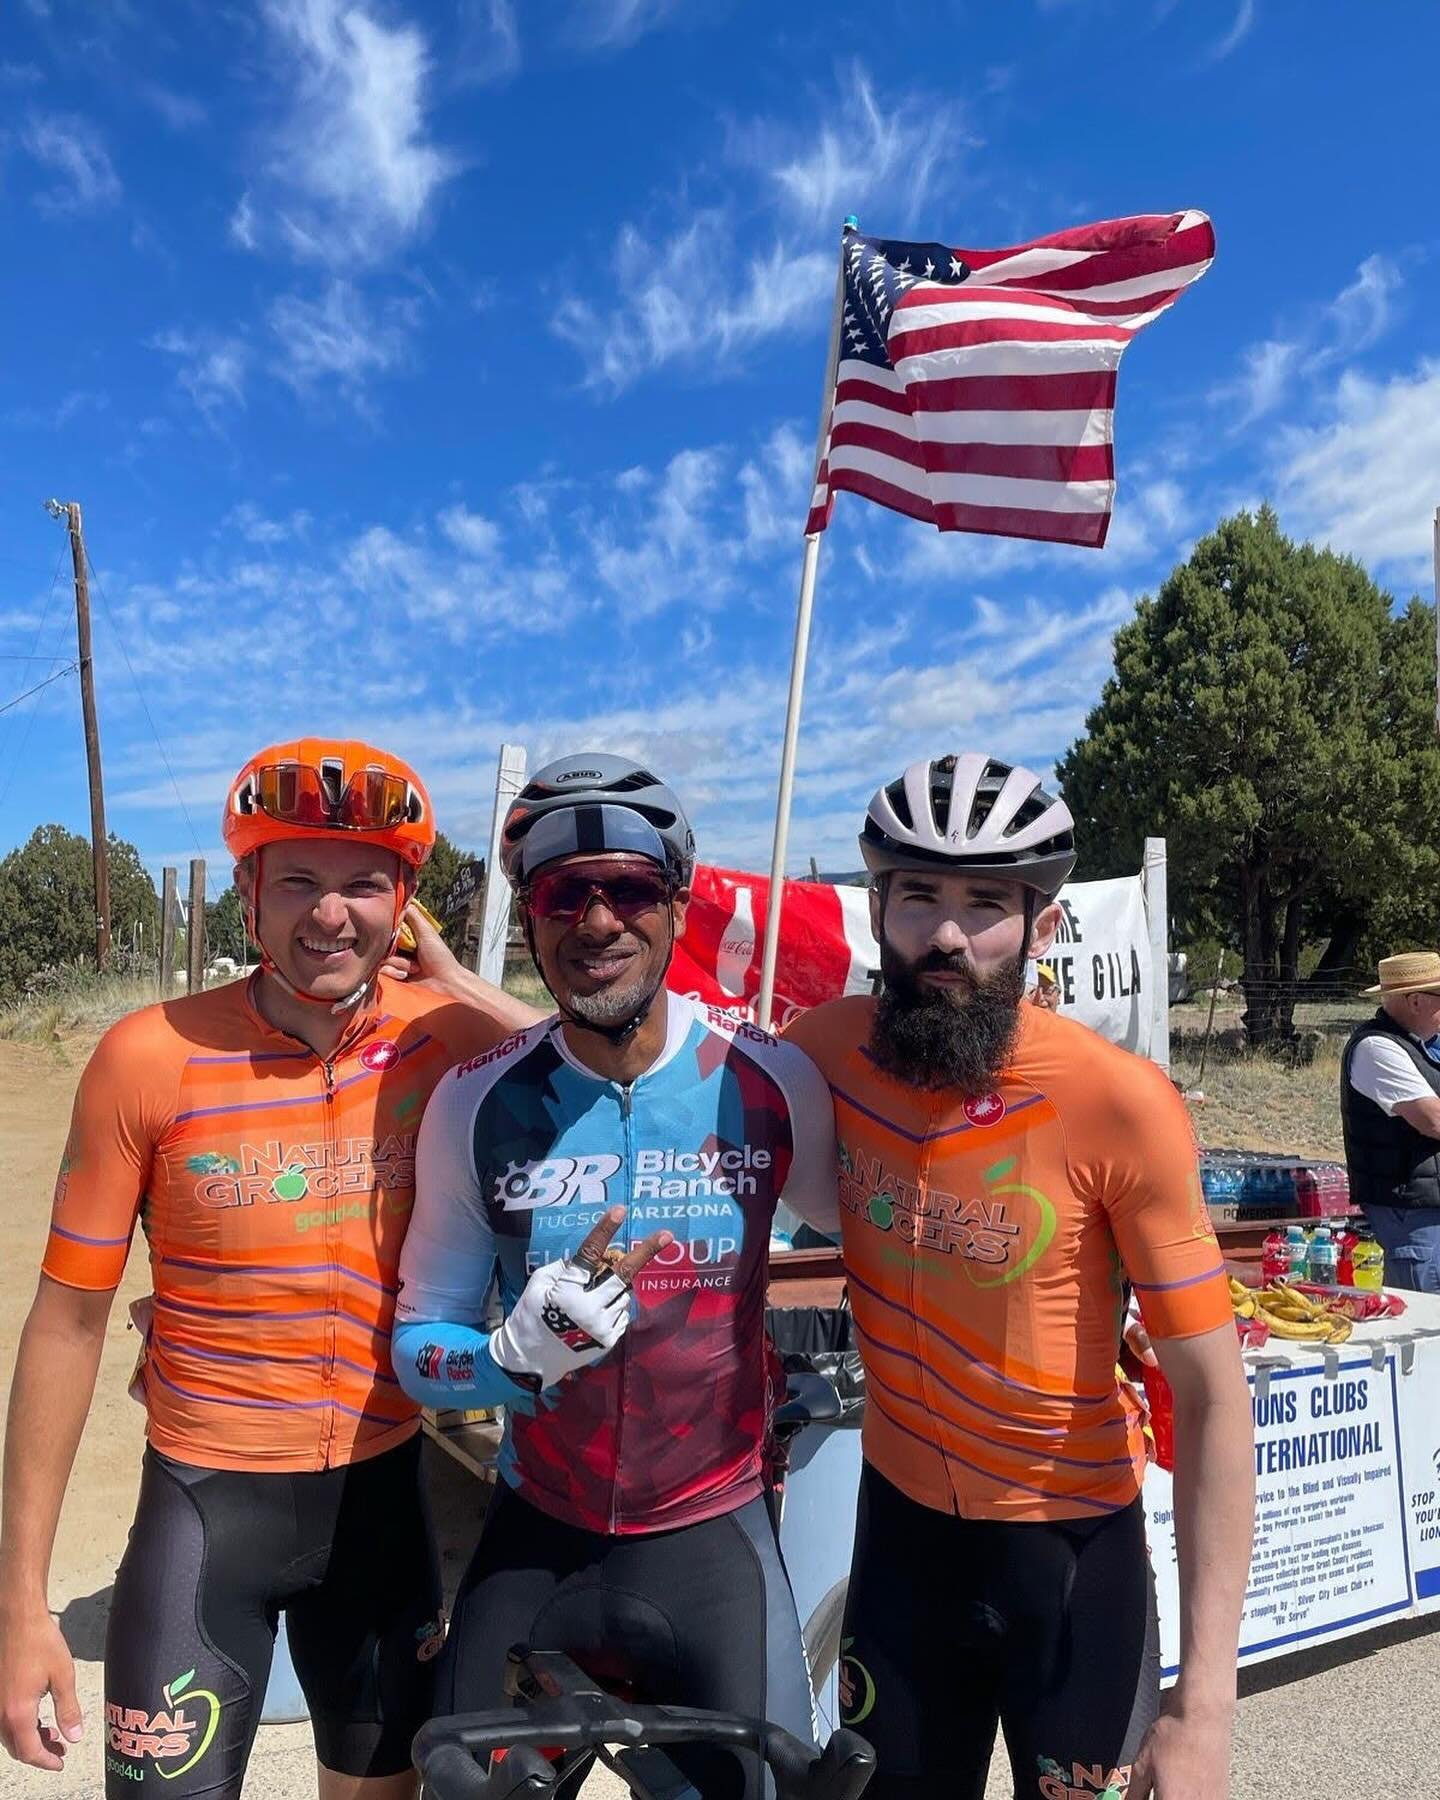 Congratulations to Jaxon, @timfrankthetank and friend @gc_cake_az for completing an extremely tough @tourofthegila 

These boys aren't scared of anything!

@naturalgrocers @nowfoodsofficial @jennifer_matthews_agency @rudyprojectna @castellicycling @k